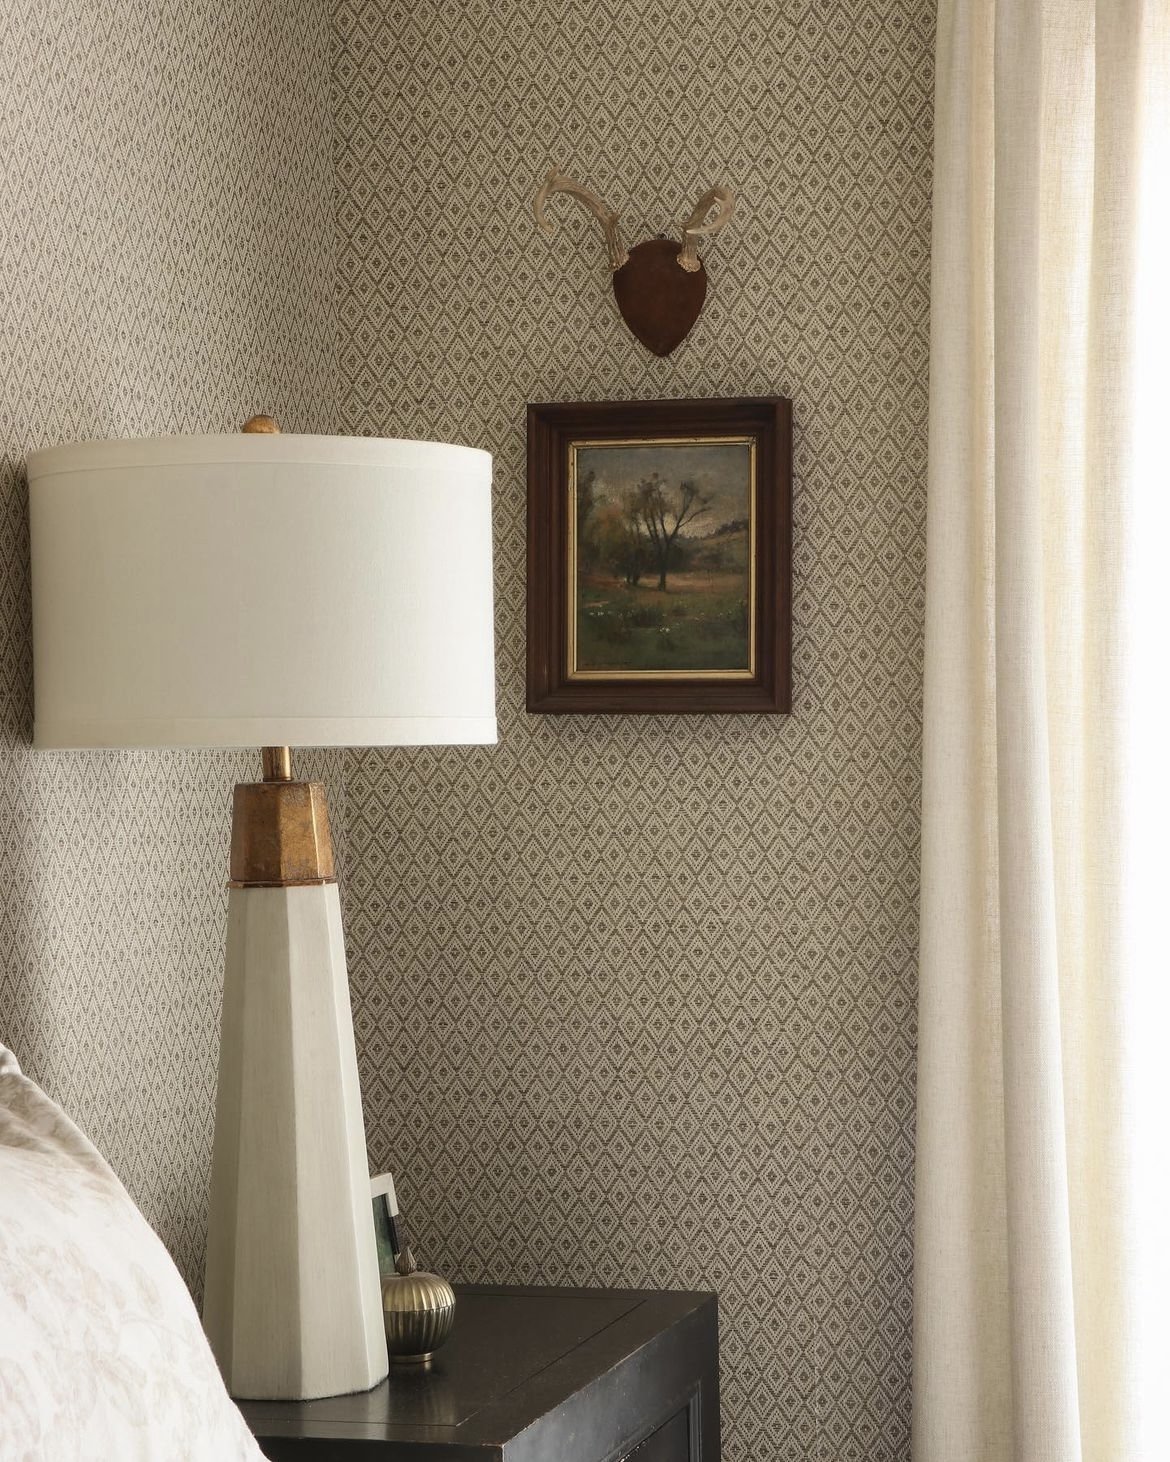 Timeless Wallpaper patterns. How to know if wallpaper is timeless or a trend. Is wallpaper just a fad? Geometric grasscloth wallpaper that won't go out of style. | Nadine Stay